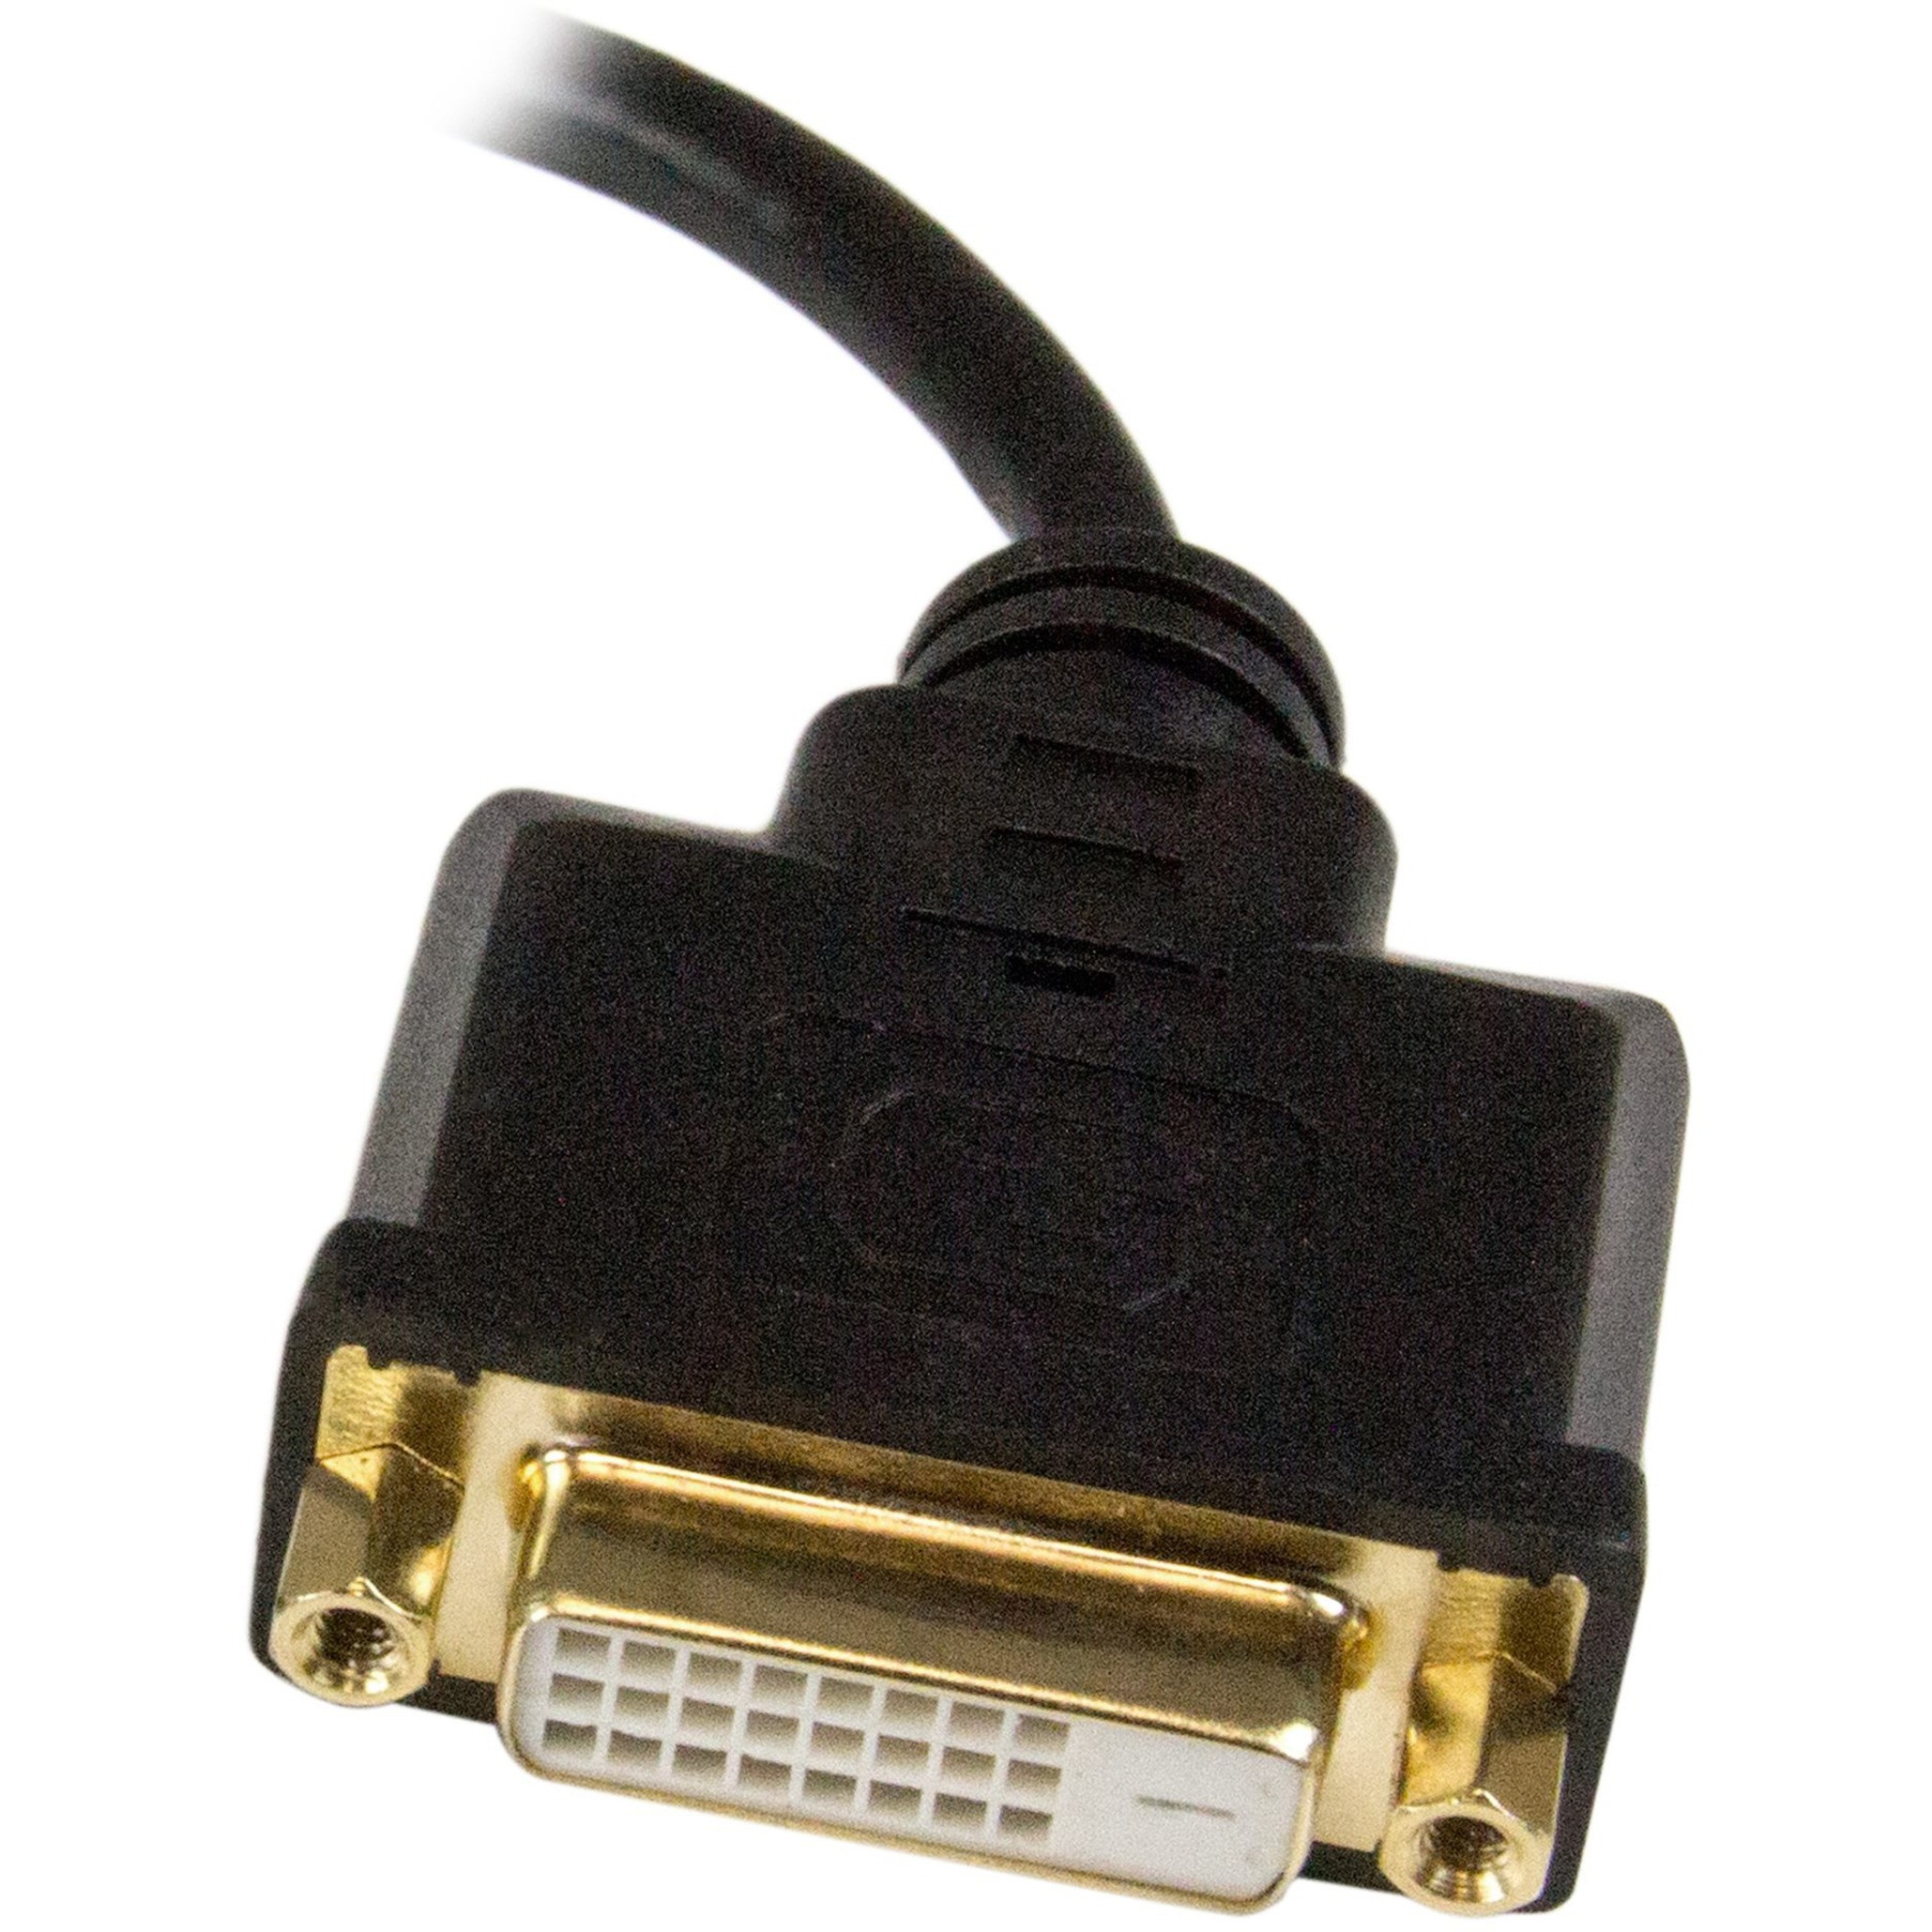 Startech .com Micro HDMI to DVI Adapter, Micro HDMI to DVI Converter, Micro HDMI Type-D Device DVI-D Monitor/Display, 8in (20cm) CableM... - Corporate Armor